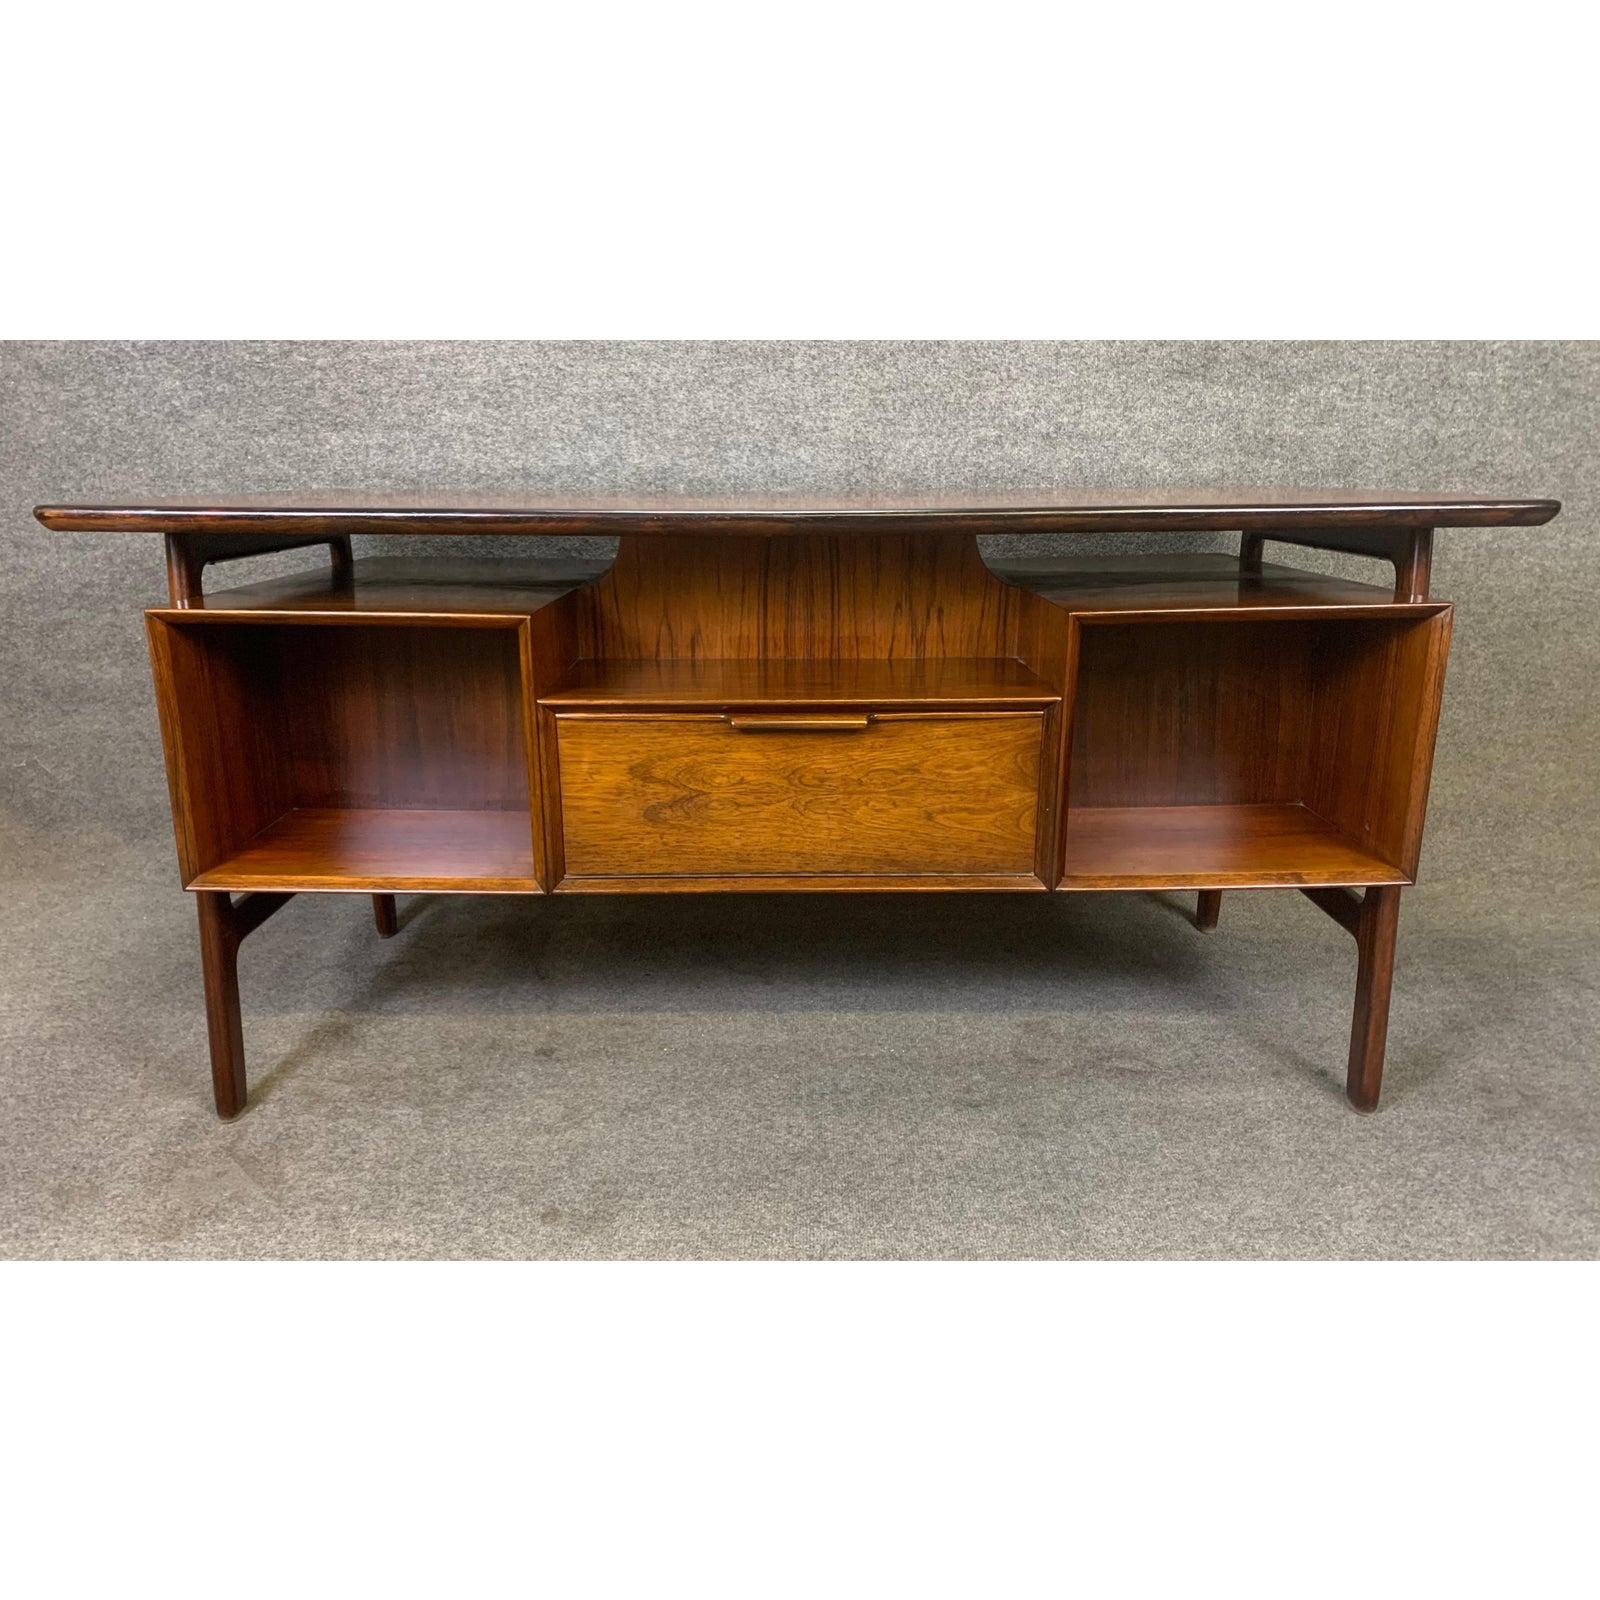 Here is the iconic model 75 desk in Brazilian rosewood designed by Gunni Omann and manufactured by Omann Jun Møbelfabrik.
This stunning 1960s Scandinavian Modern desk features a sculpted leg frame supporting seamlessly two floating banks of three